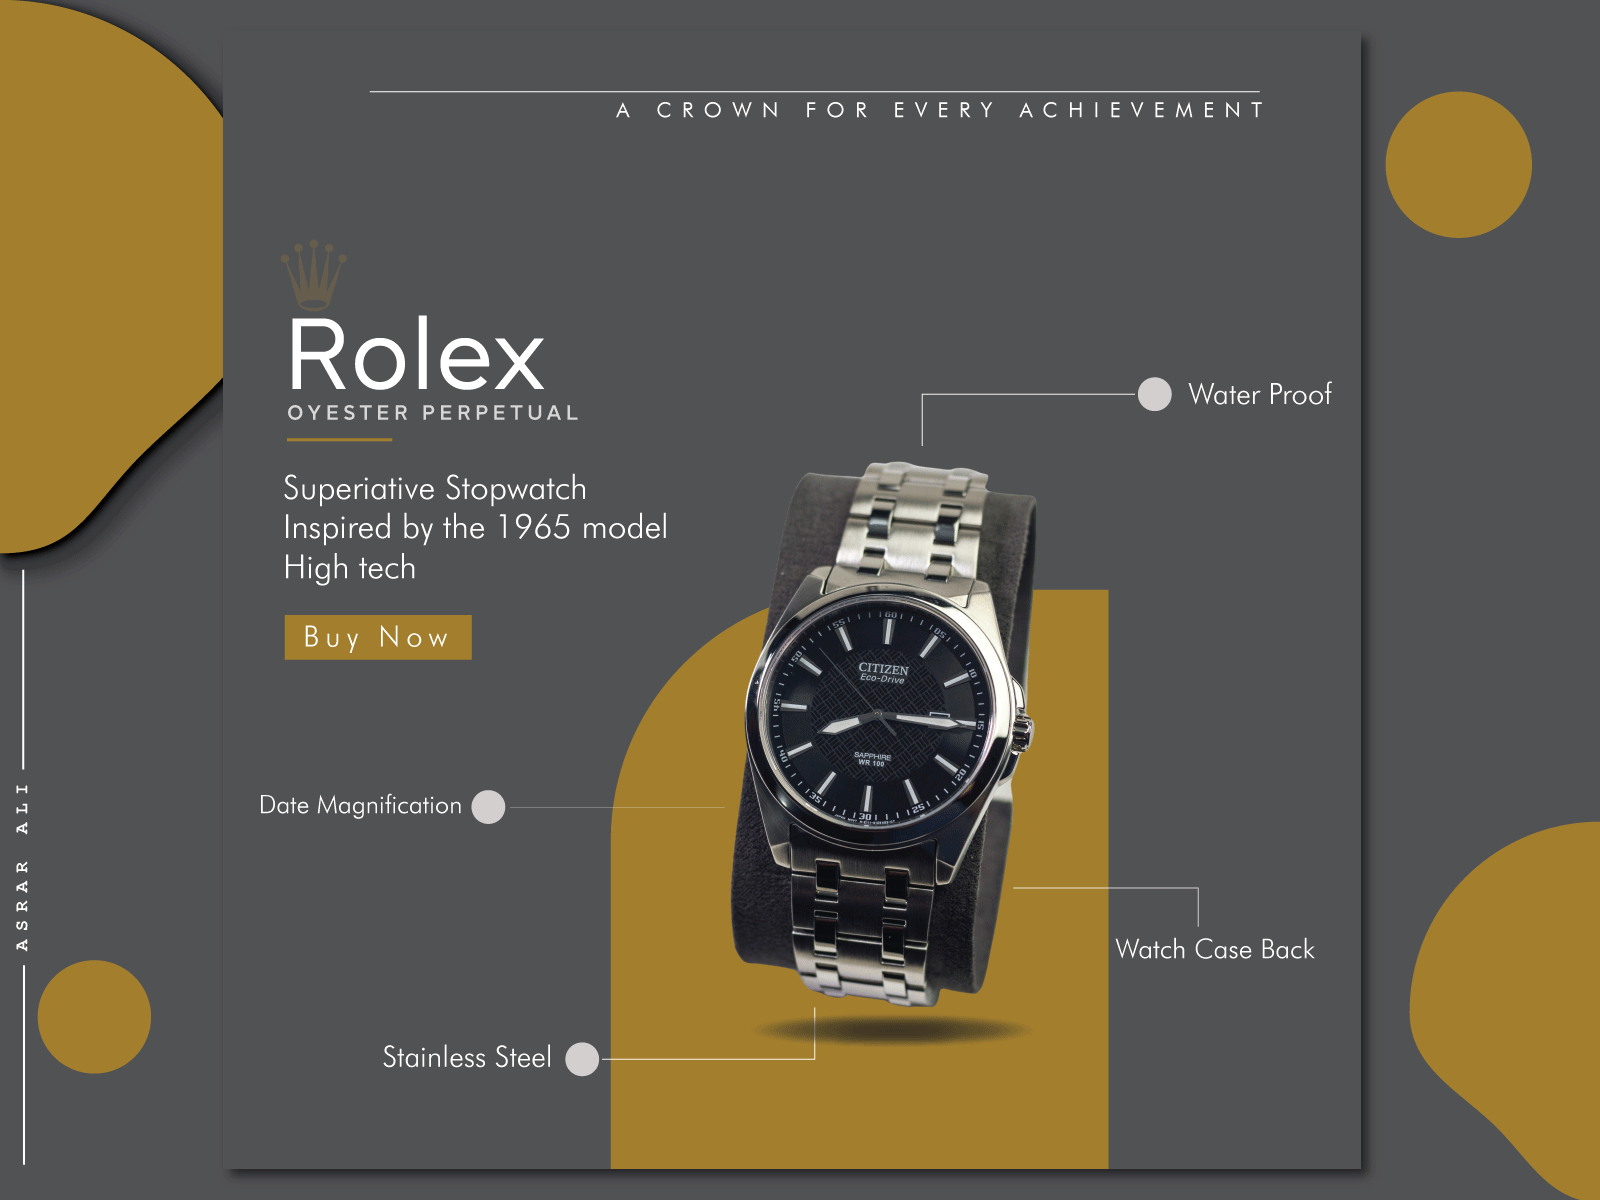 Advertisement Poster Of Rolex Brand by Asrar Ali on Dribbble